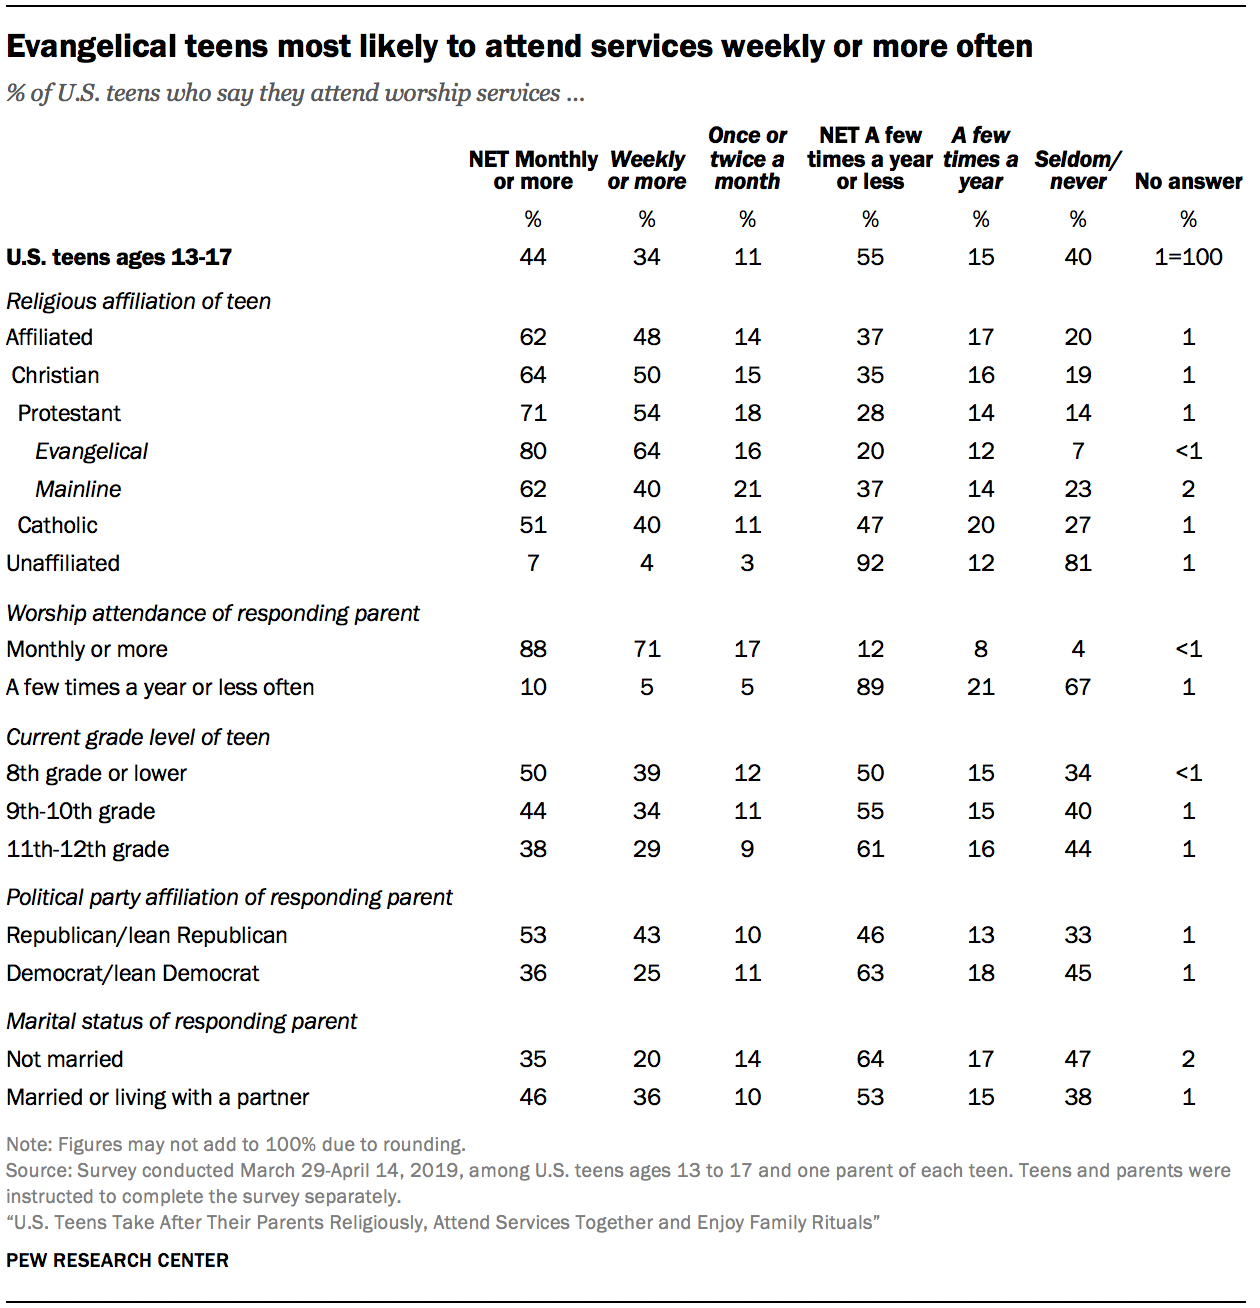 Evangelical teens most likely to attend services weekly or more often